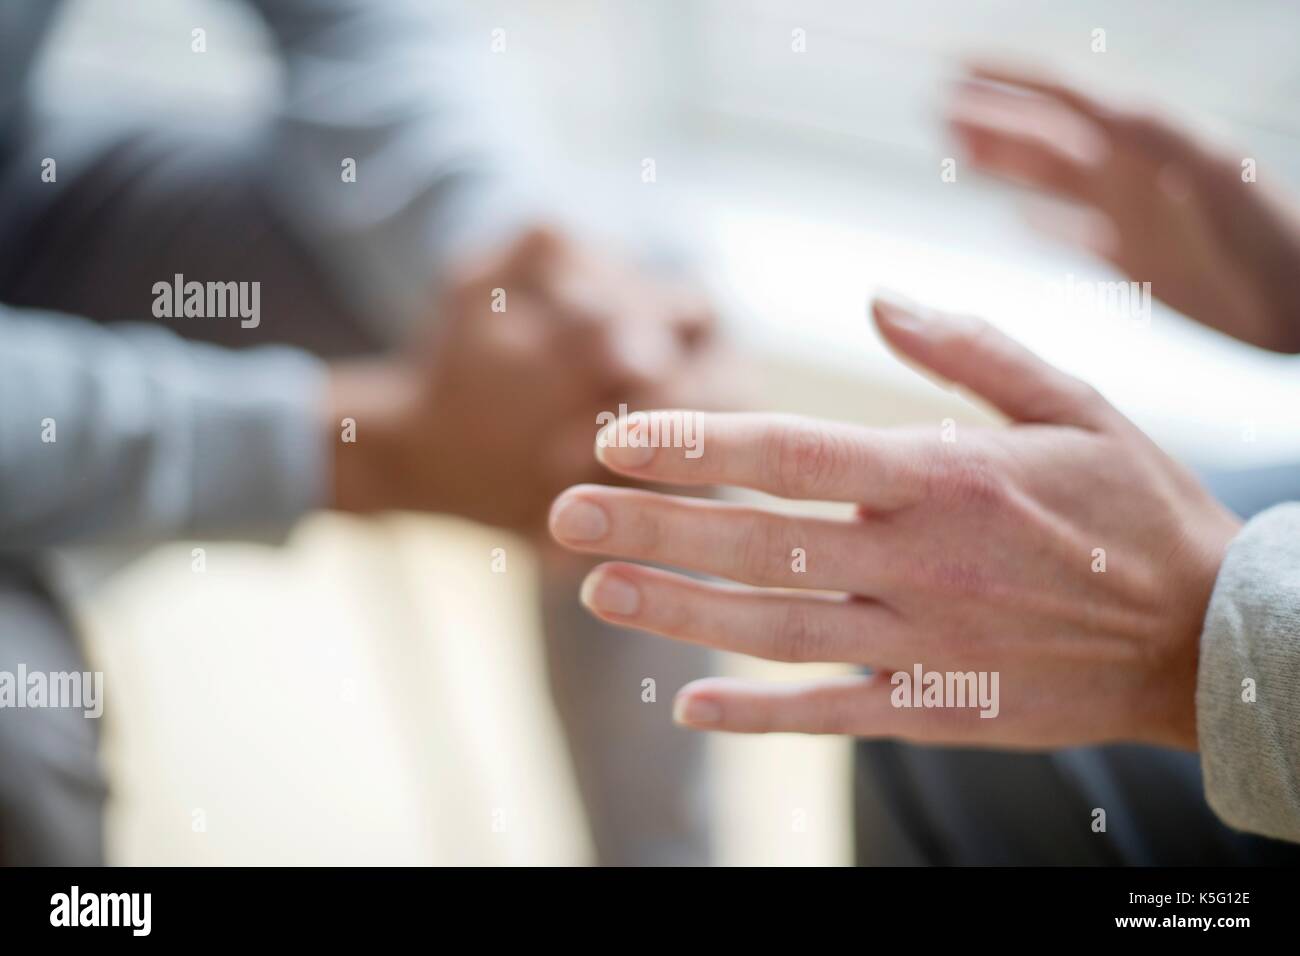 Woman gesturing with hands, man in background. Stock Photo